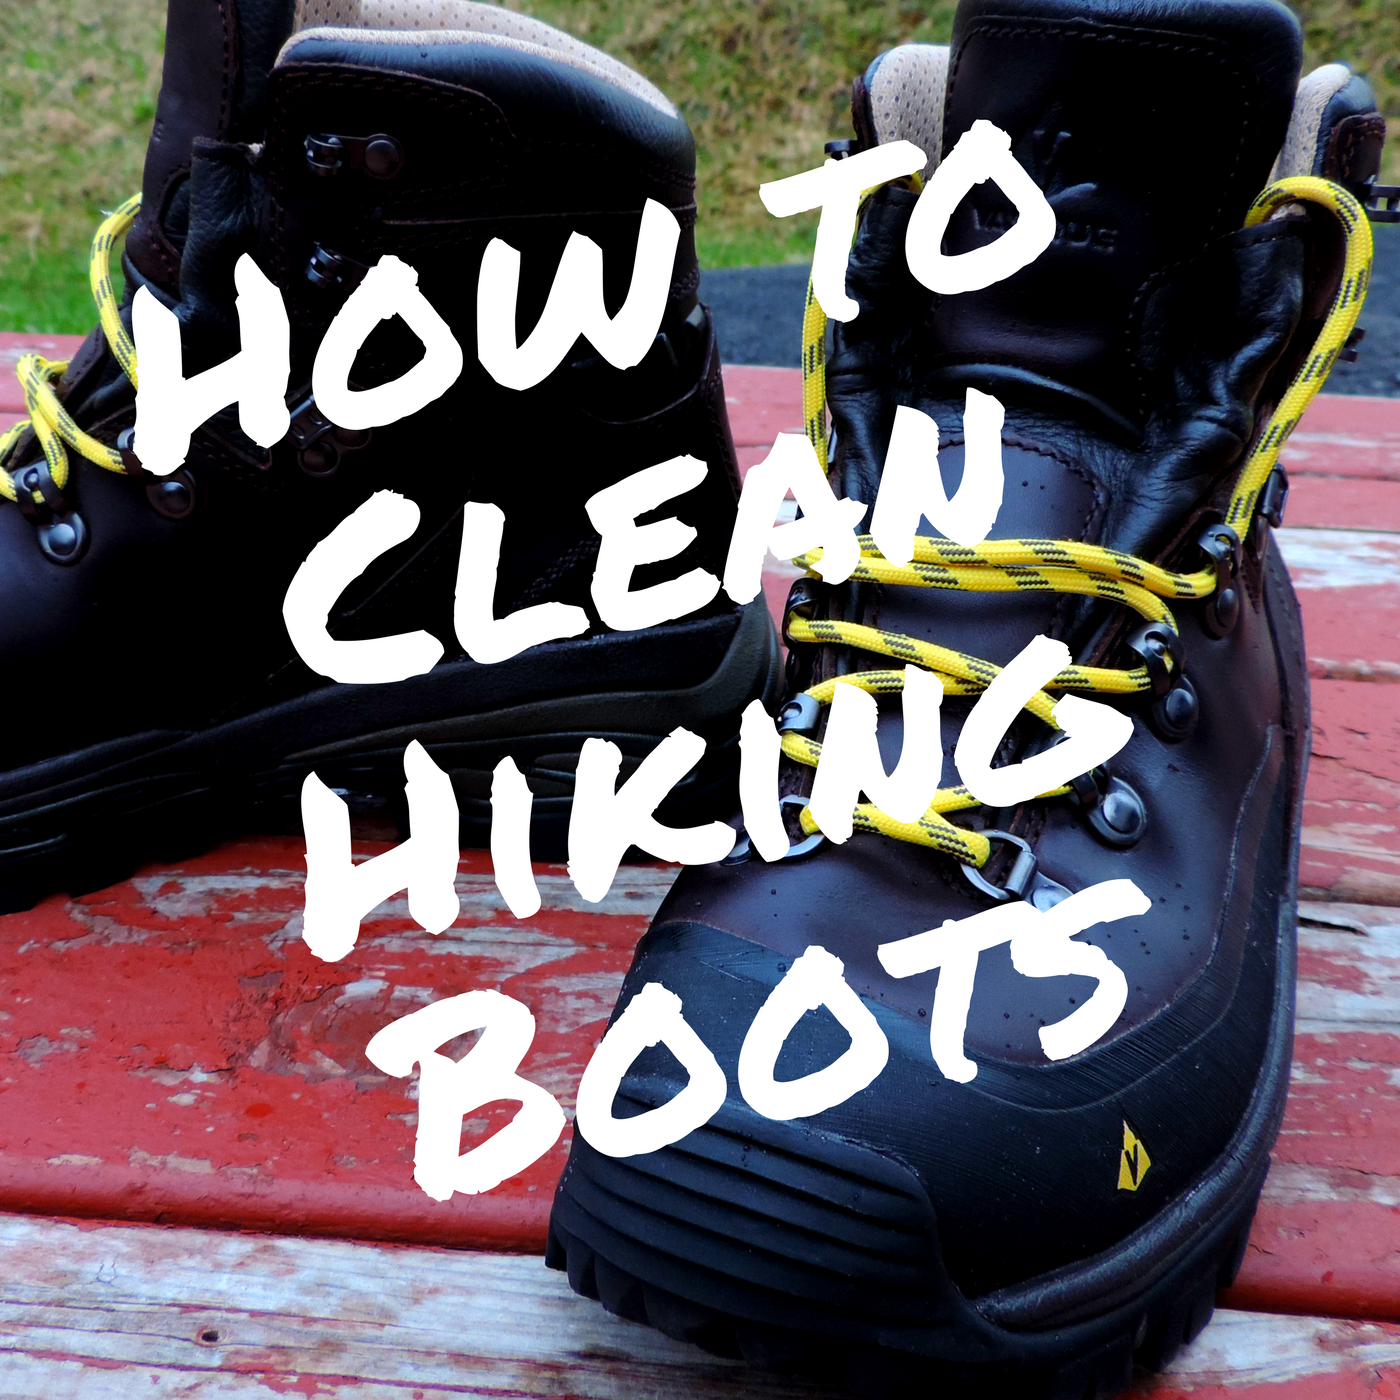 Clean Hiking Boots, Wildly Intrepid